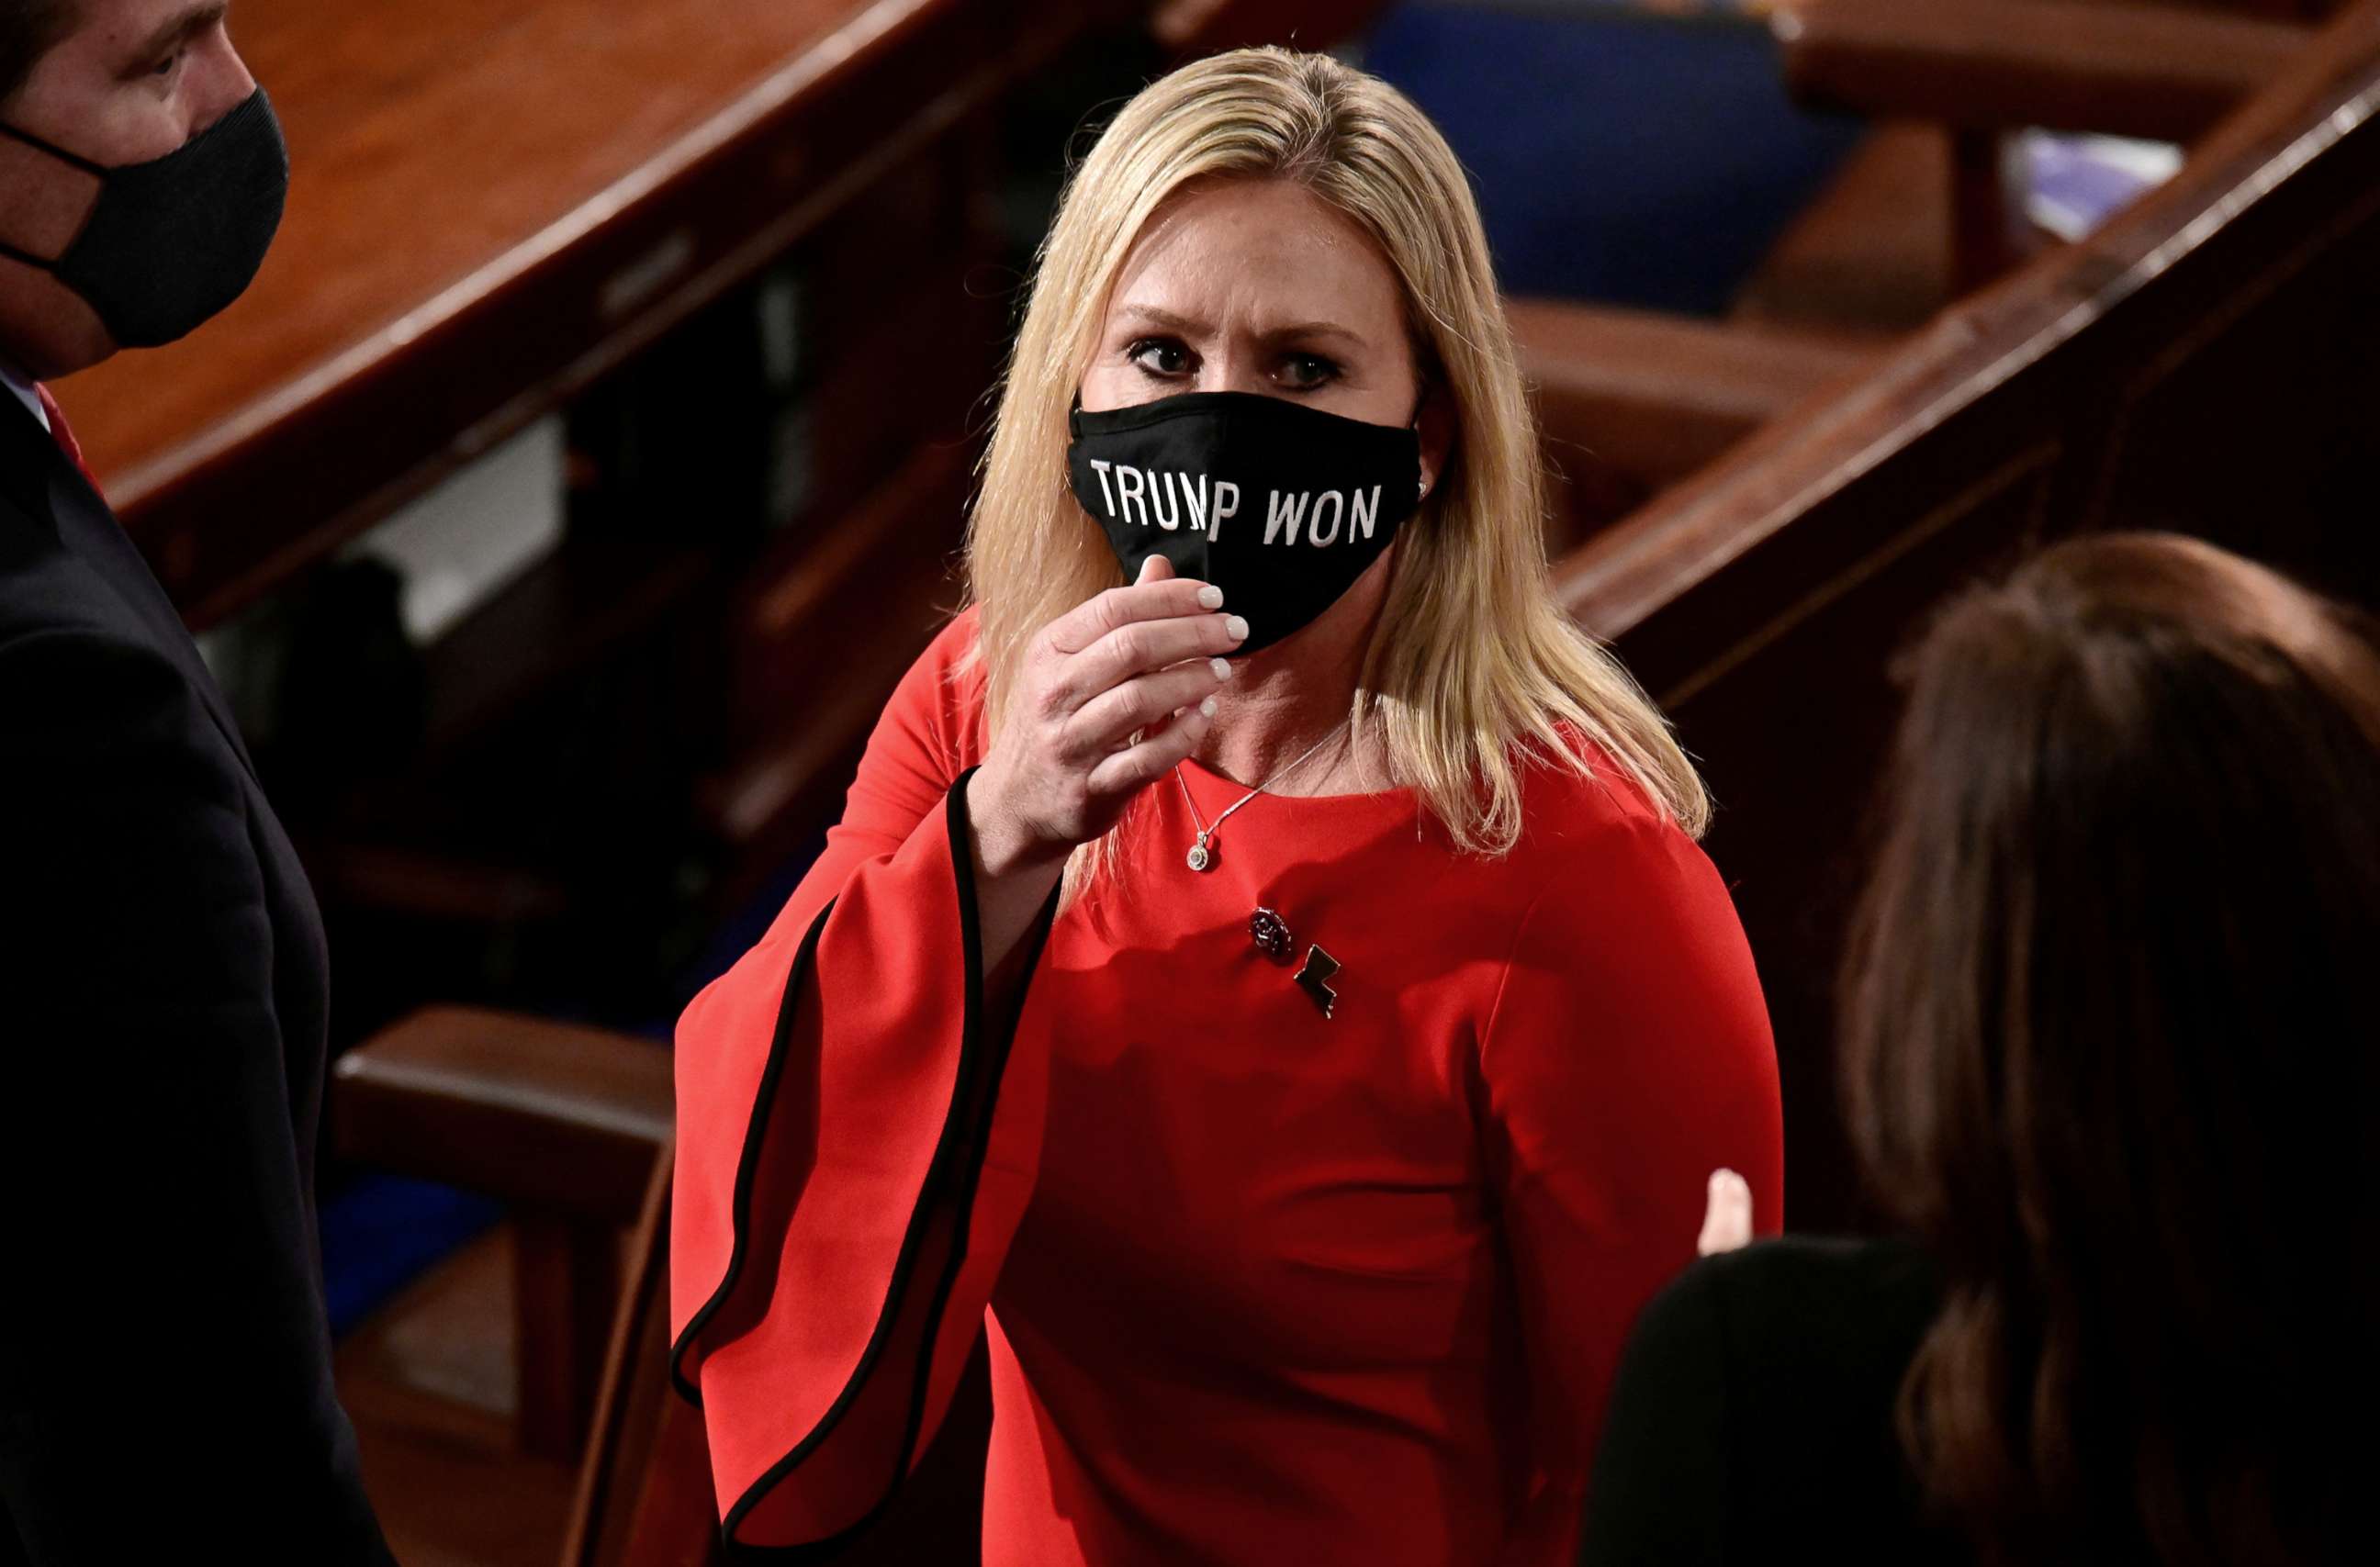 PHOTO: Rep. Marjorie Taylor Greene wears a "Trump Won" face mask as she arrives on the floor of the House to take her oath of office as a newly elected member of the 117th House of Representatives in Washington, D.C., Jan. 3, 2021.